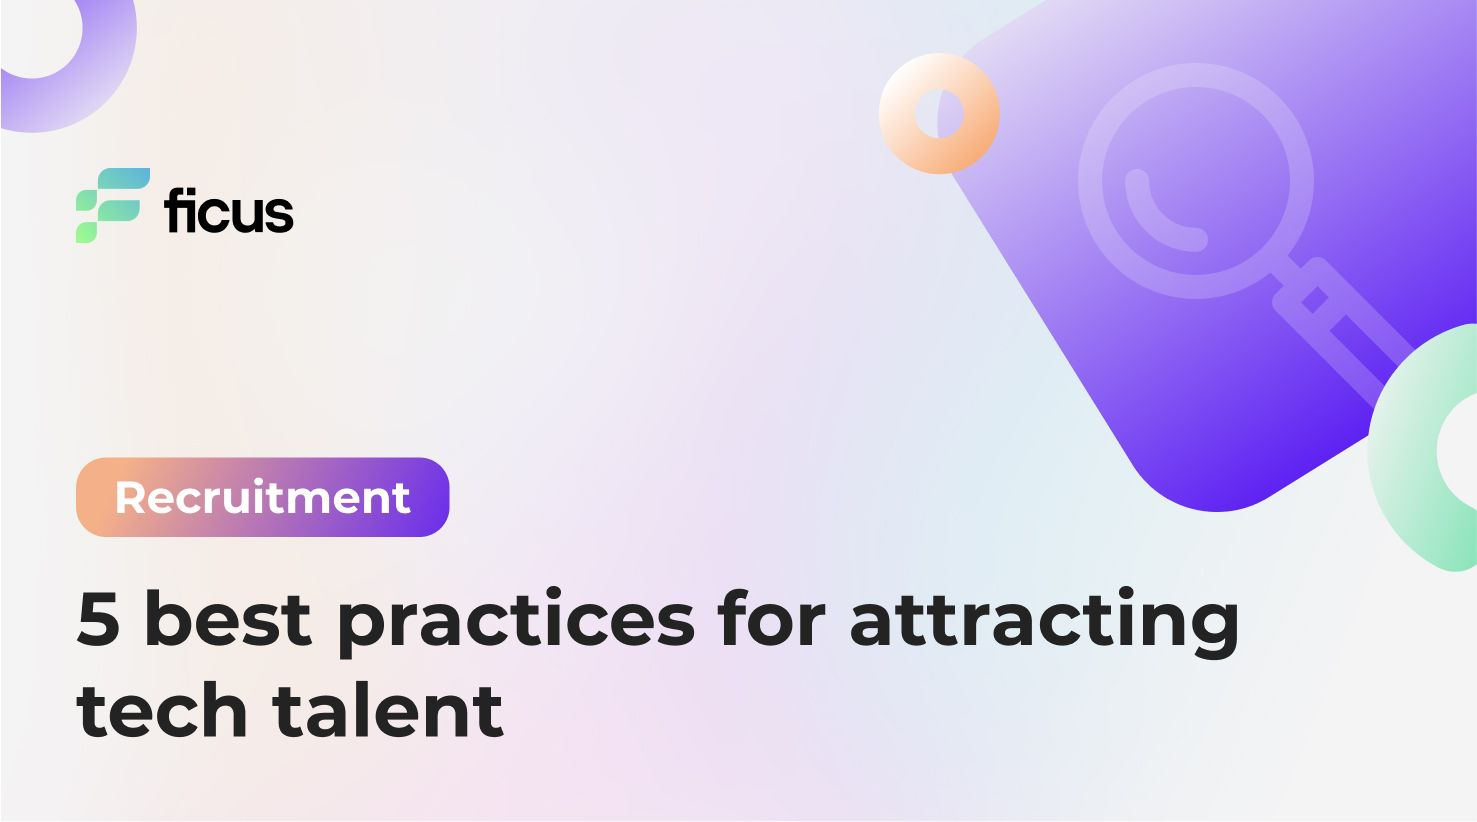 5 best practices for attracting tech talent